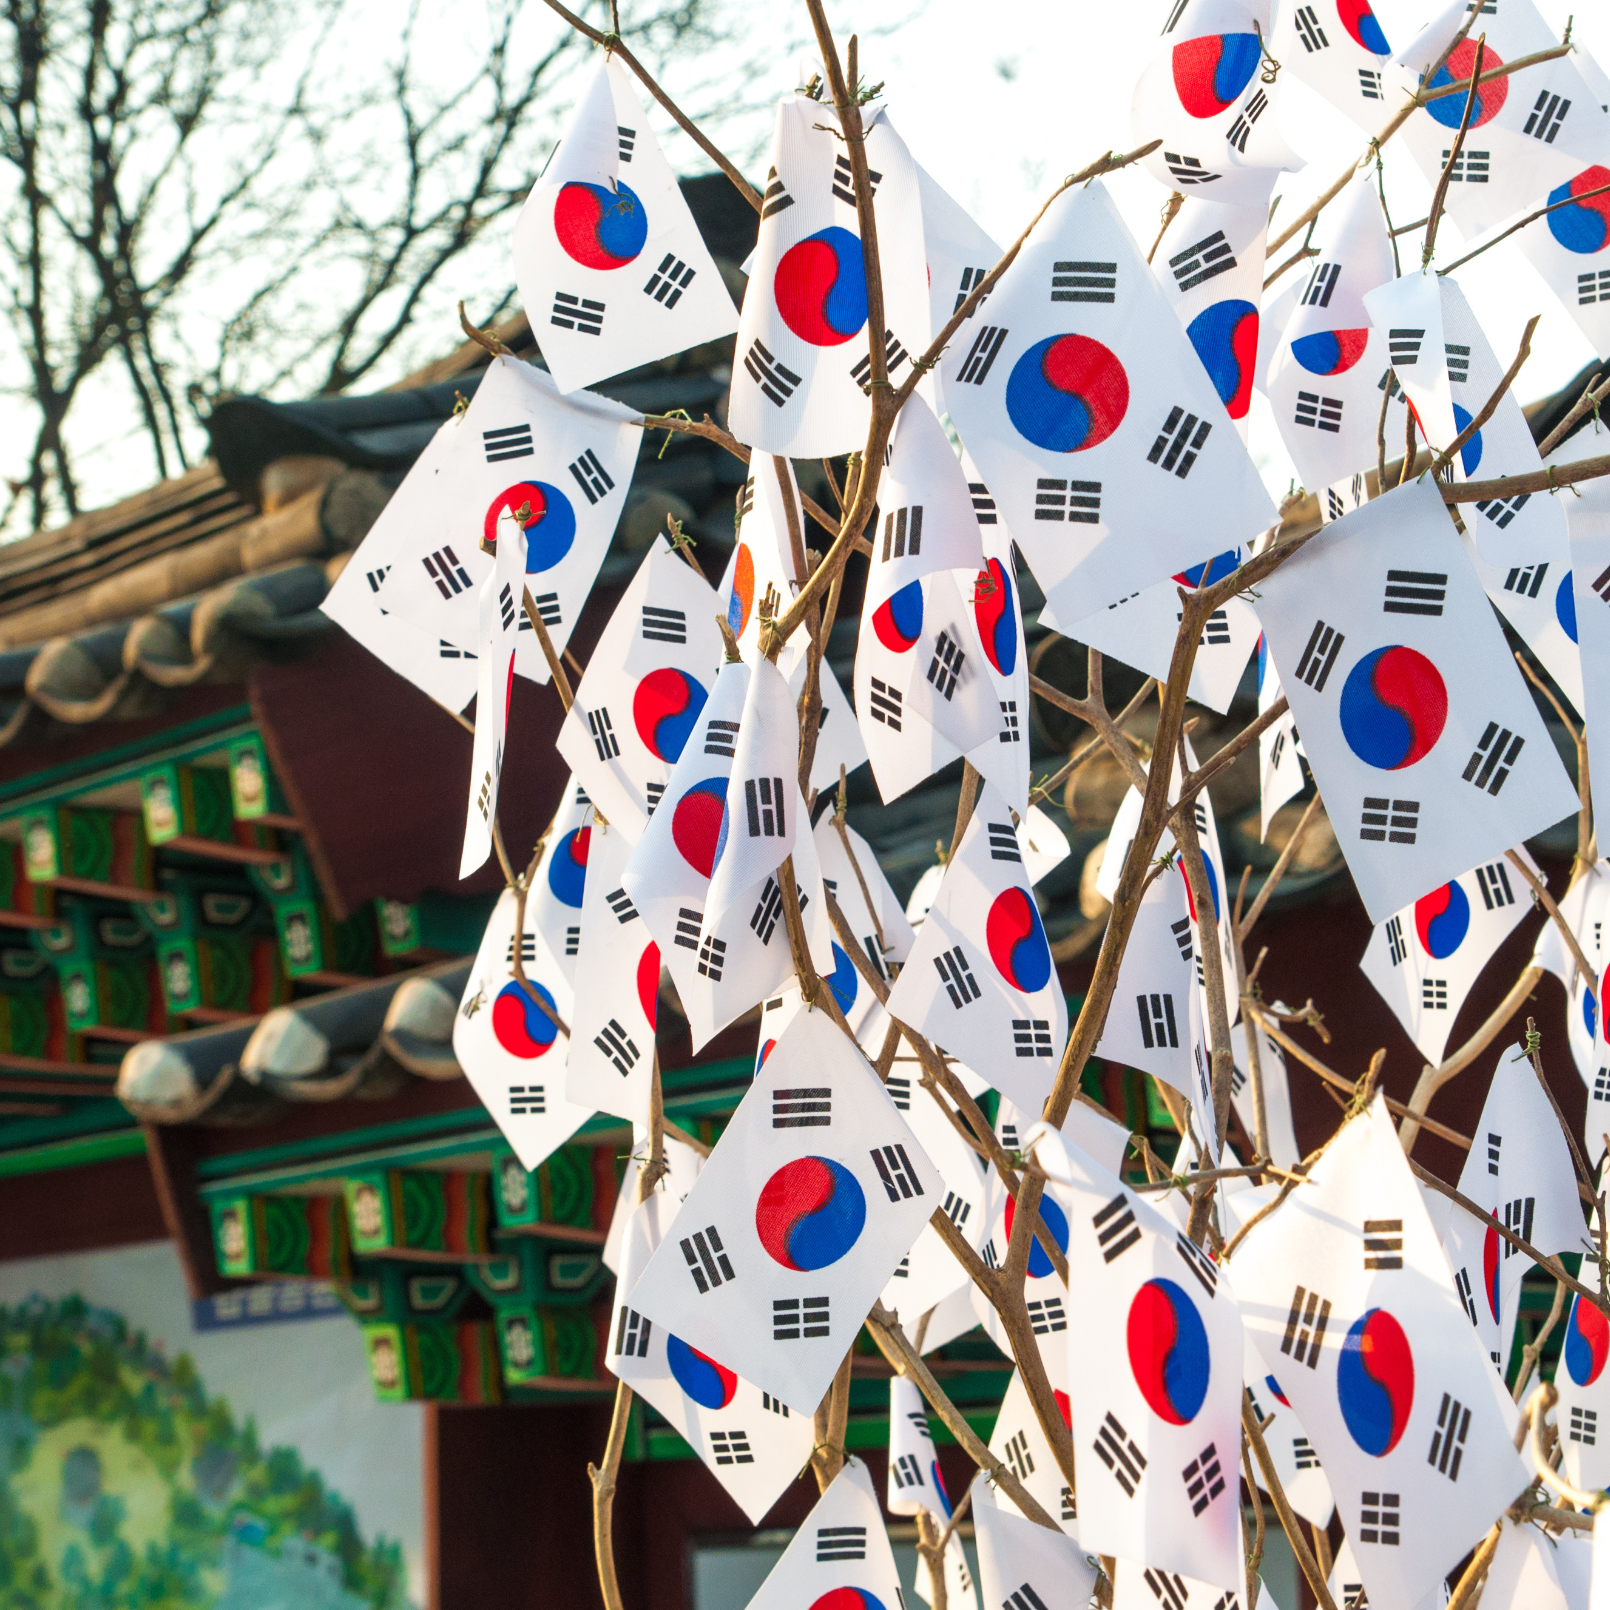 23 Cryptocurrency Exchanges in South Korea to Self-Regulate, 10 Opt-Out